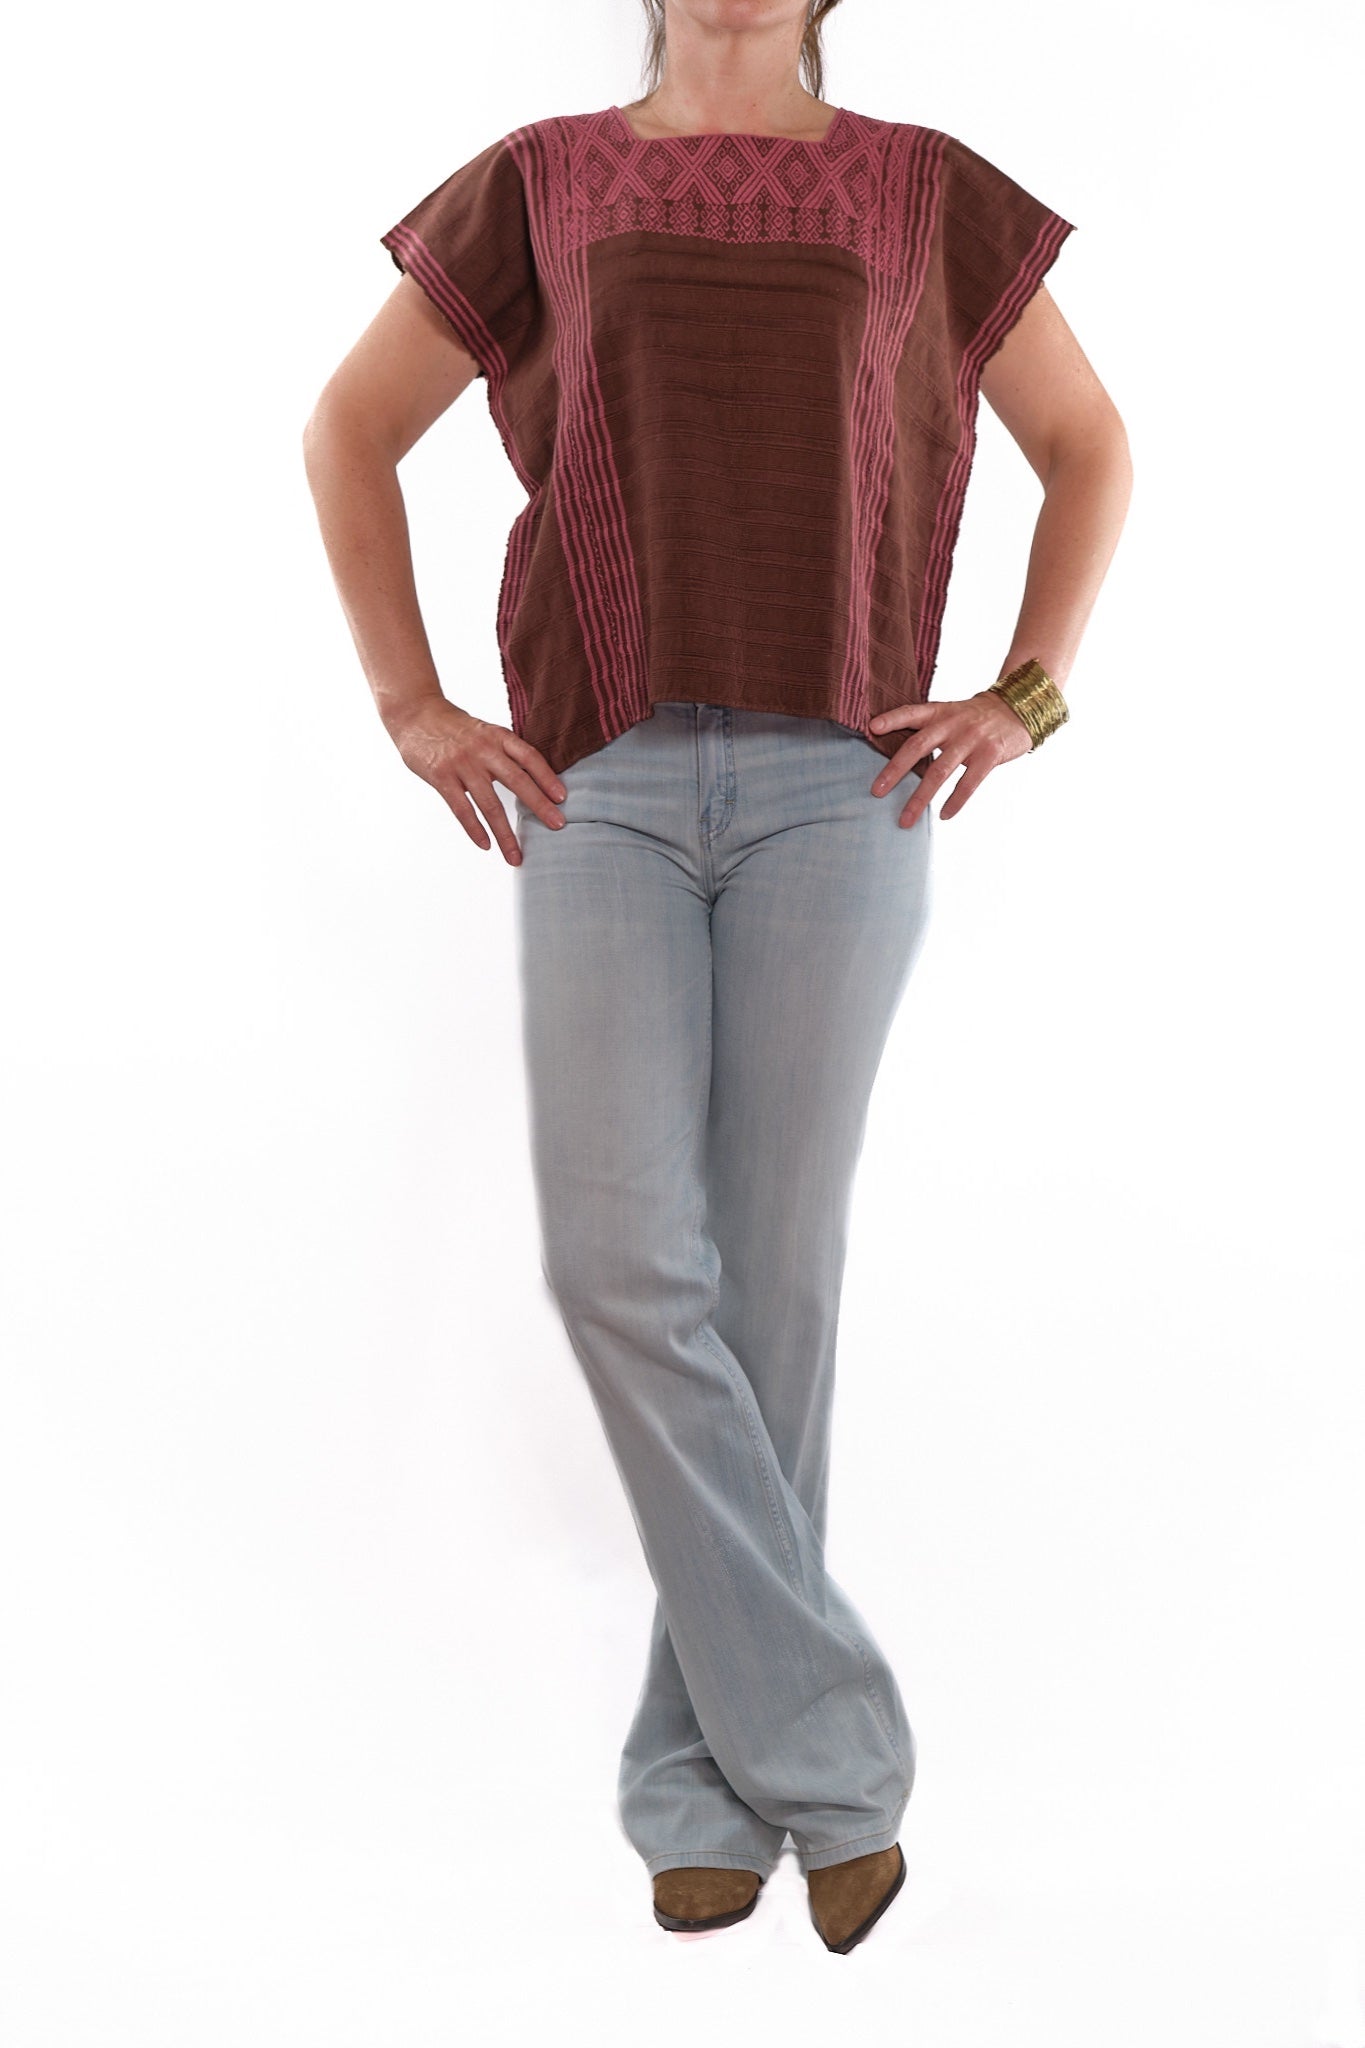 Ofelia Unraveled Blouse brown with pink embroidery